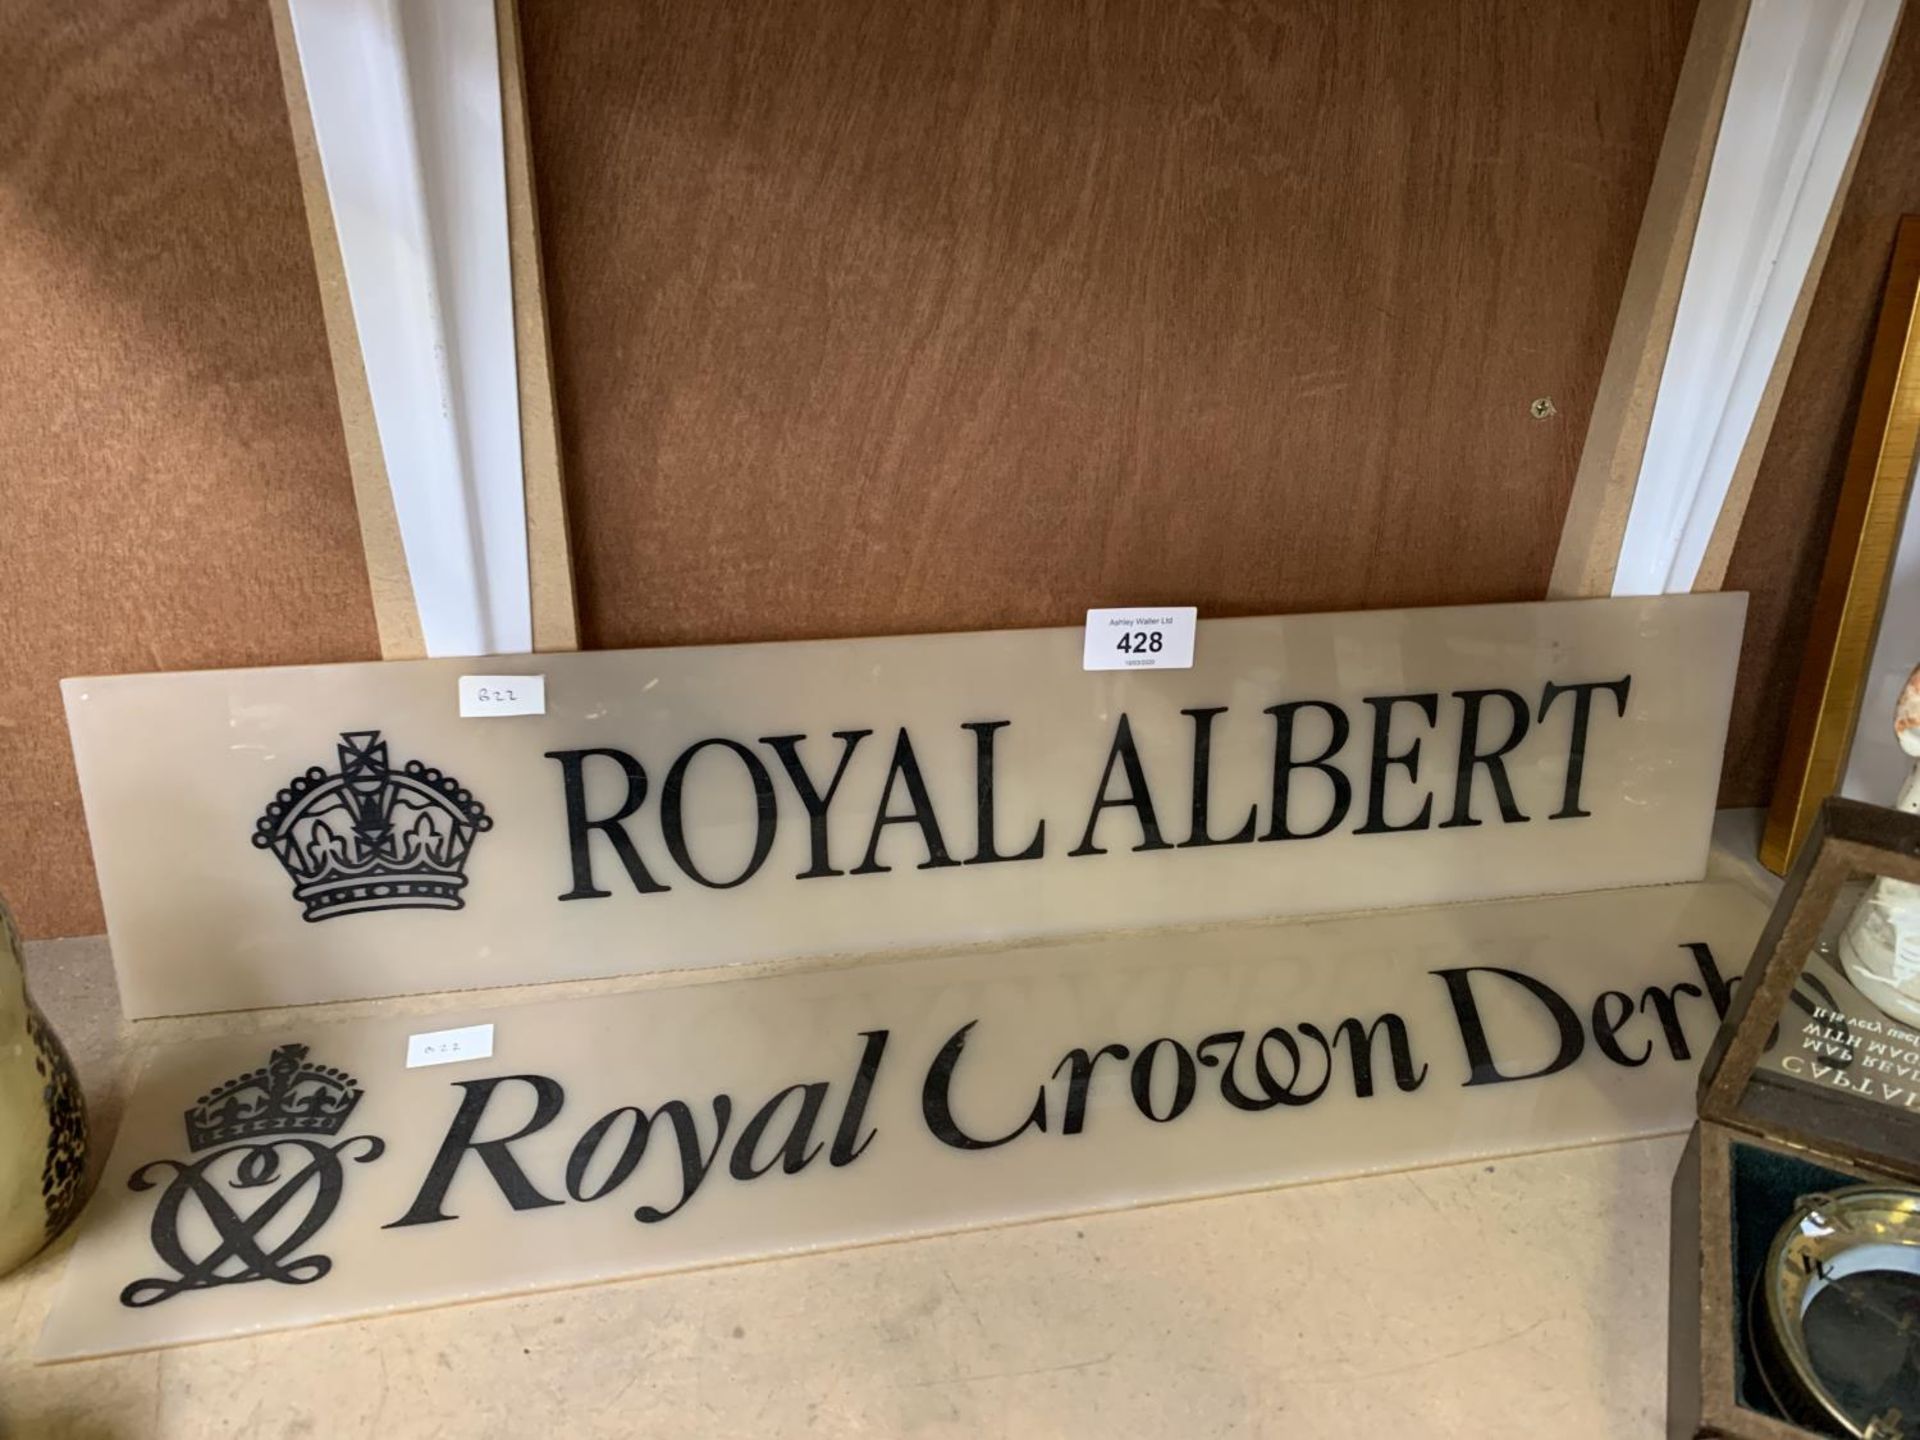 TWO ADVERTISING SIGNS - ROYAL CROWN DERBY AND ROYAL ALBERT